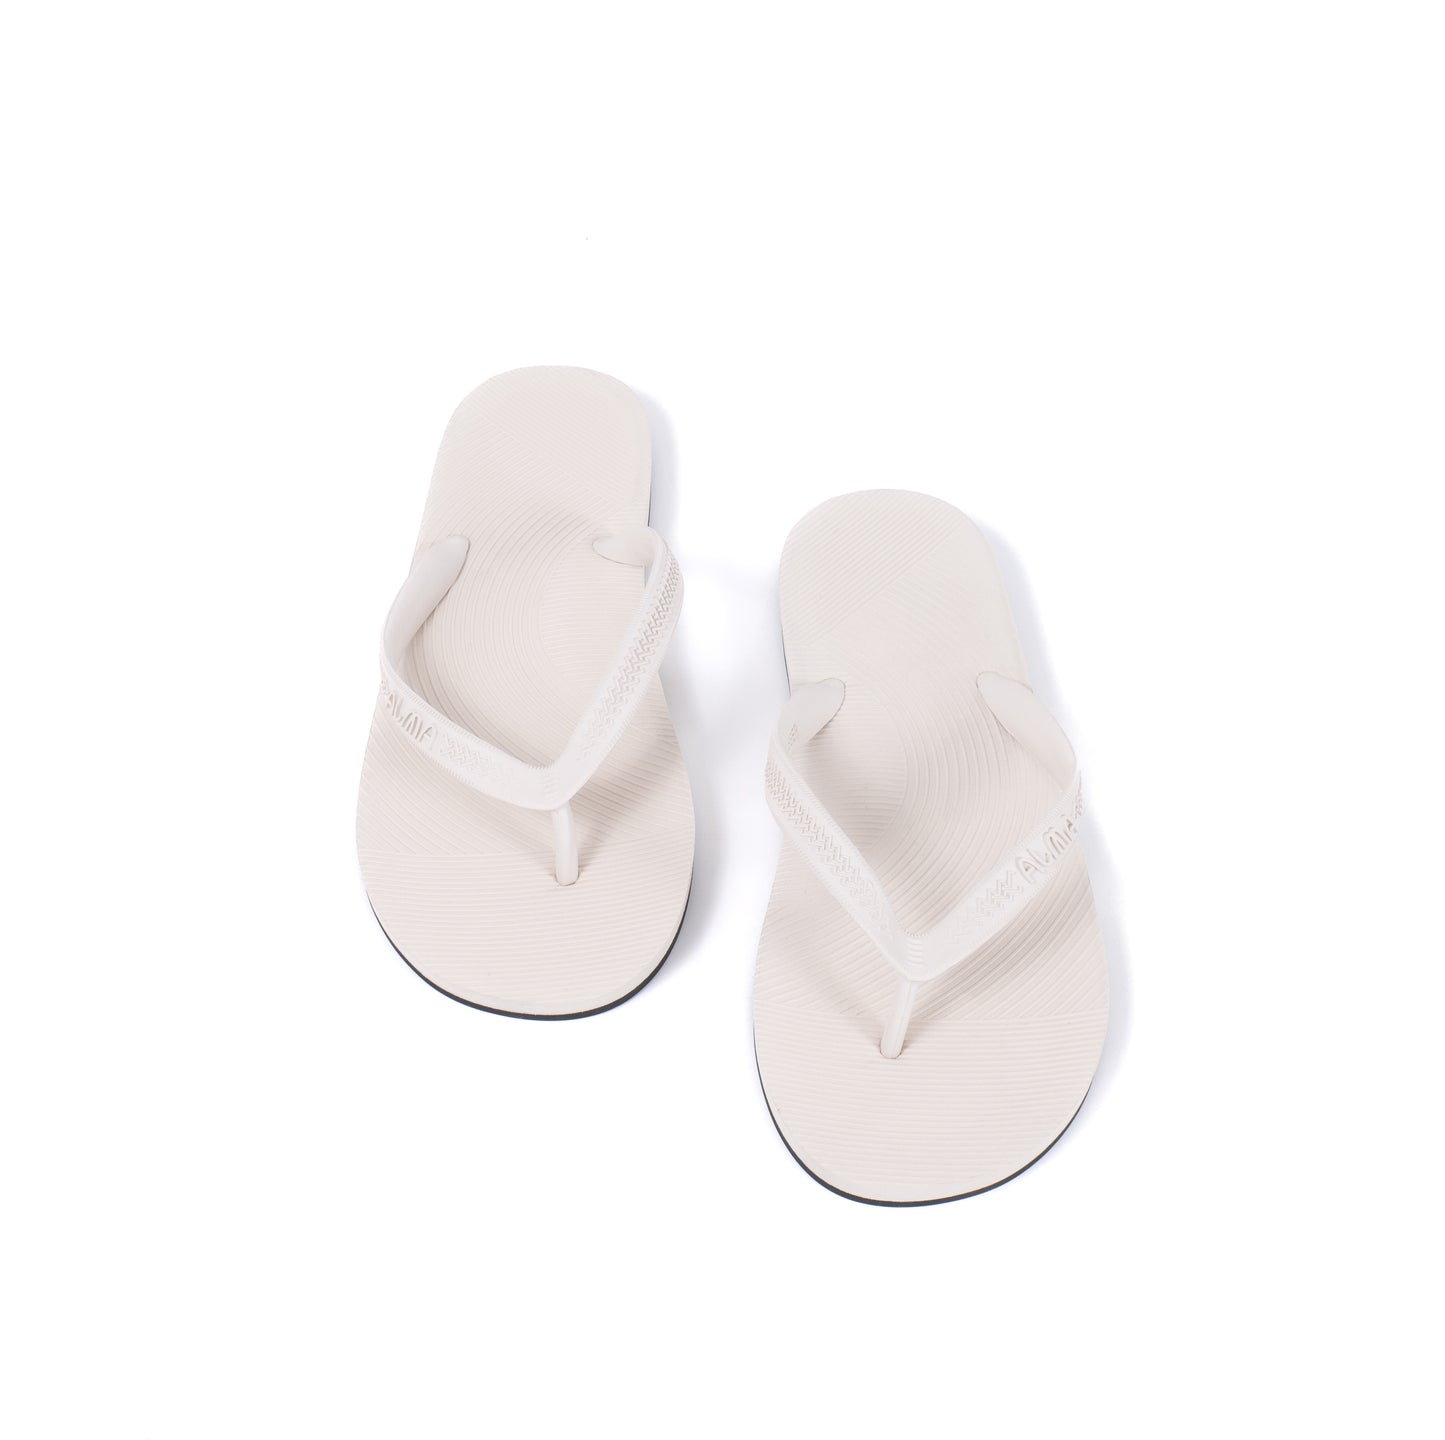 Women's Recycled Tire Sole Flip Flop - Pearl